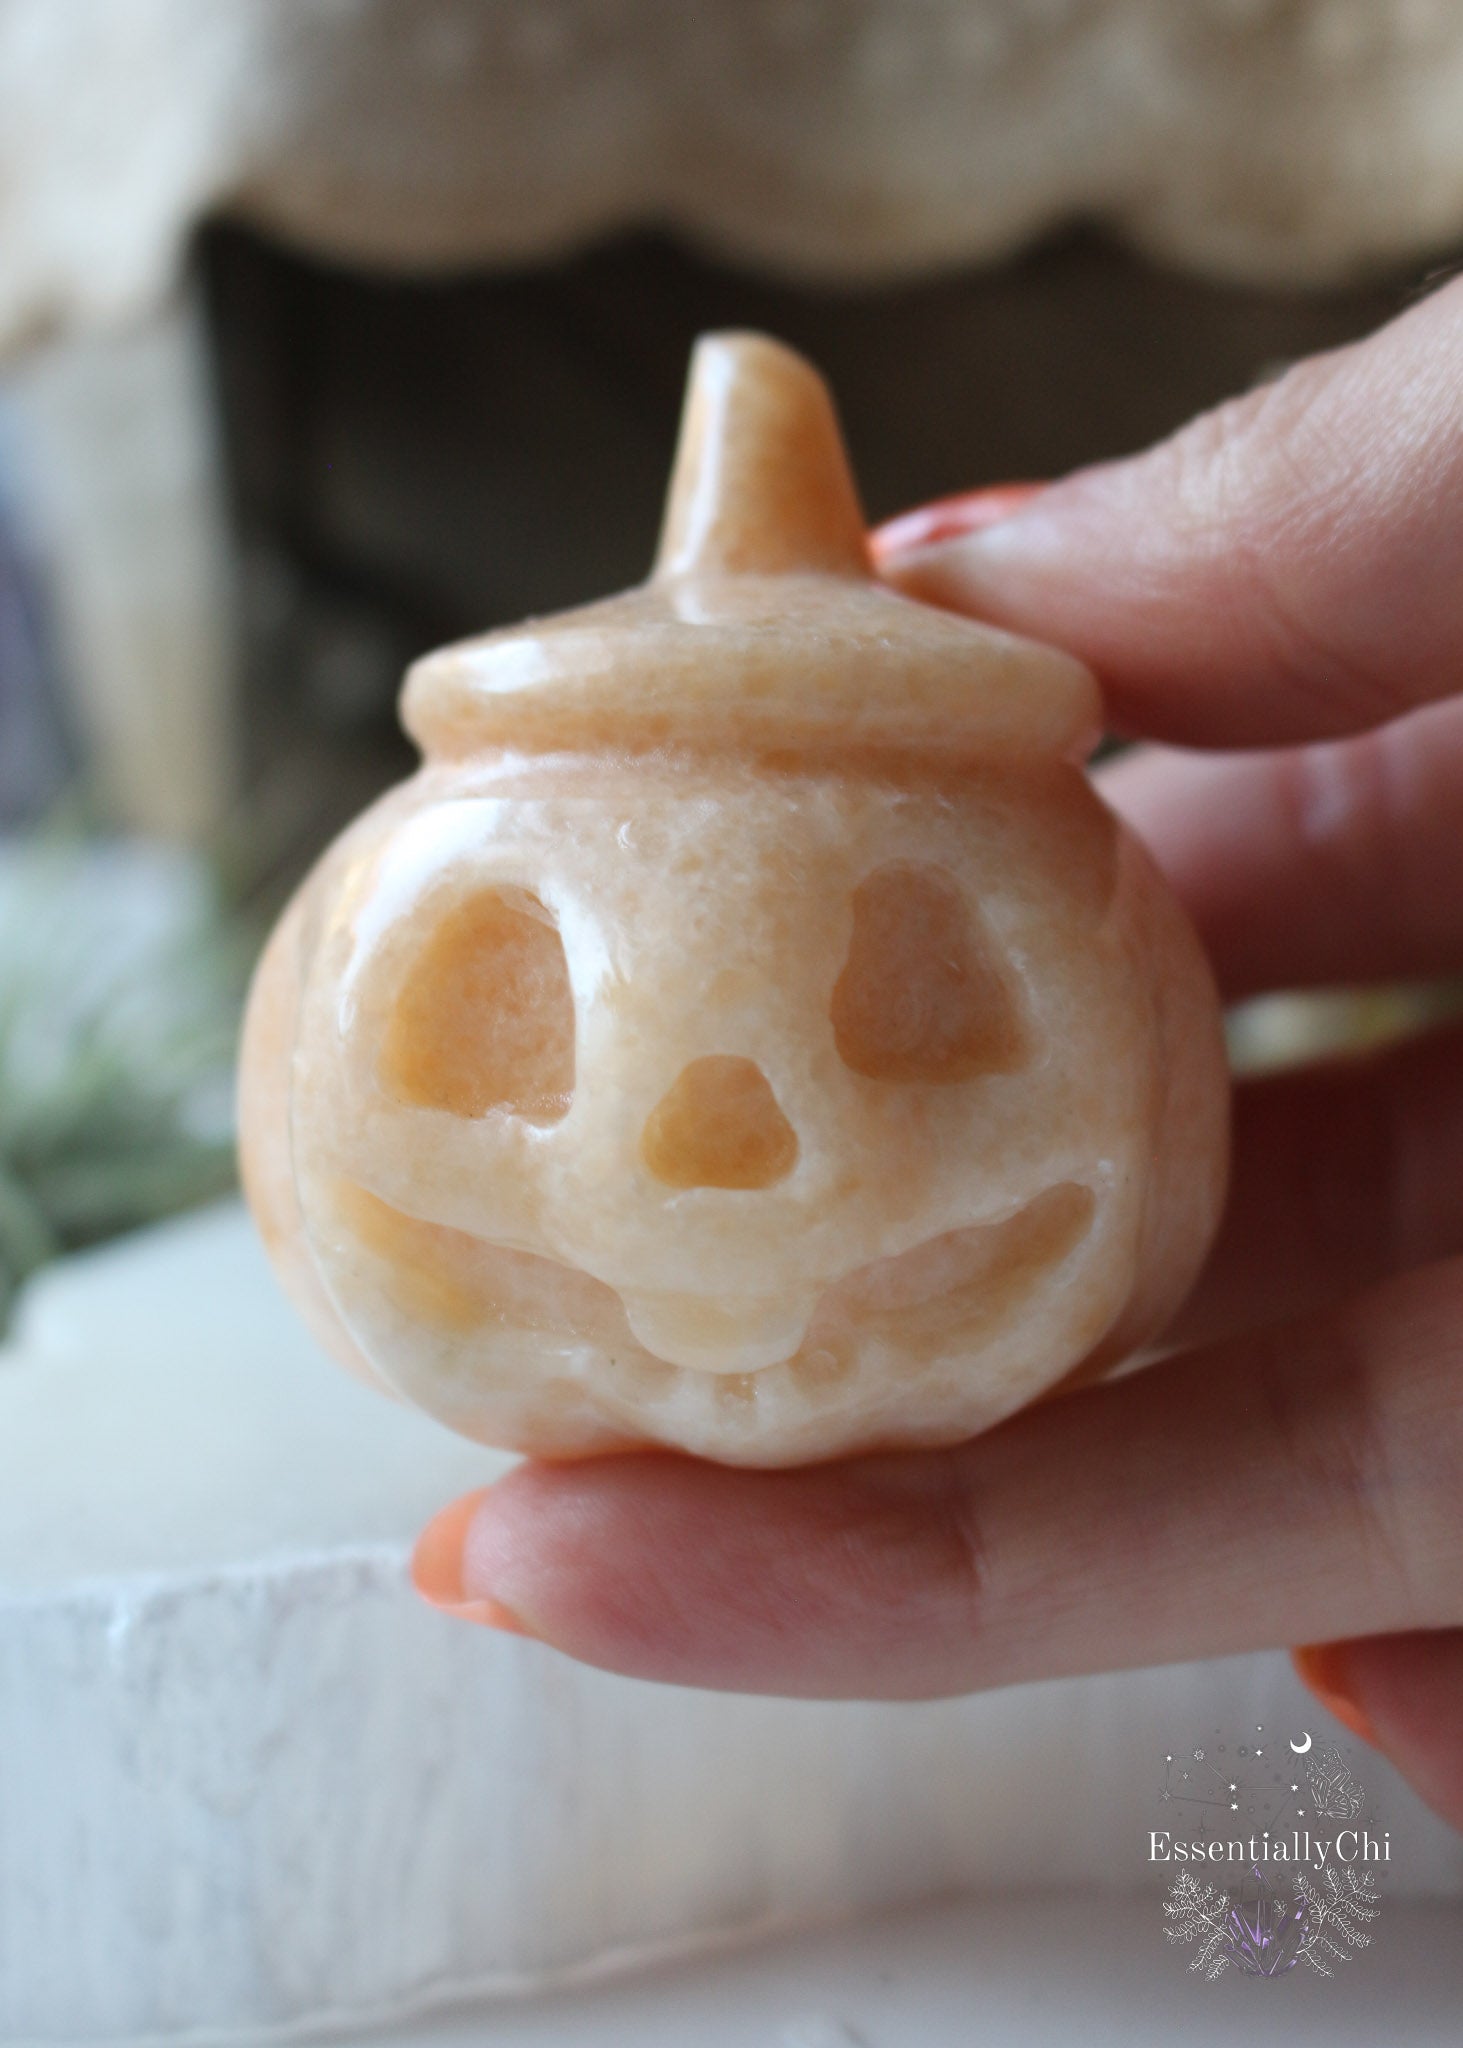 Nothing says Happy Halloween than a cute orange pumpkin. This beautiful Orange Calcite pumpkin is a real gem for creative energy. Orange Calcite Meaning - Orange Calcite helps encourage playfulness, lightheartedness, and confidence and is a catalyst for inspiration, sparking your creative fire. If you are fighting stagnant energy, Orange Calcite can help cure a lazy streak and keep you focused. This energy also helps improve psychic abilities and aligning your thought with your willpower. 